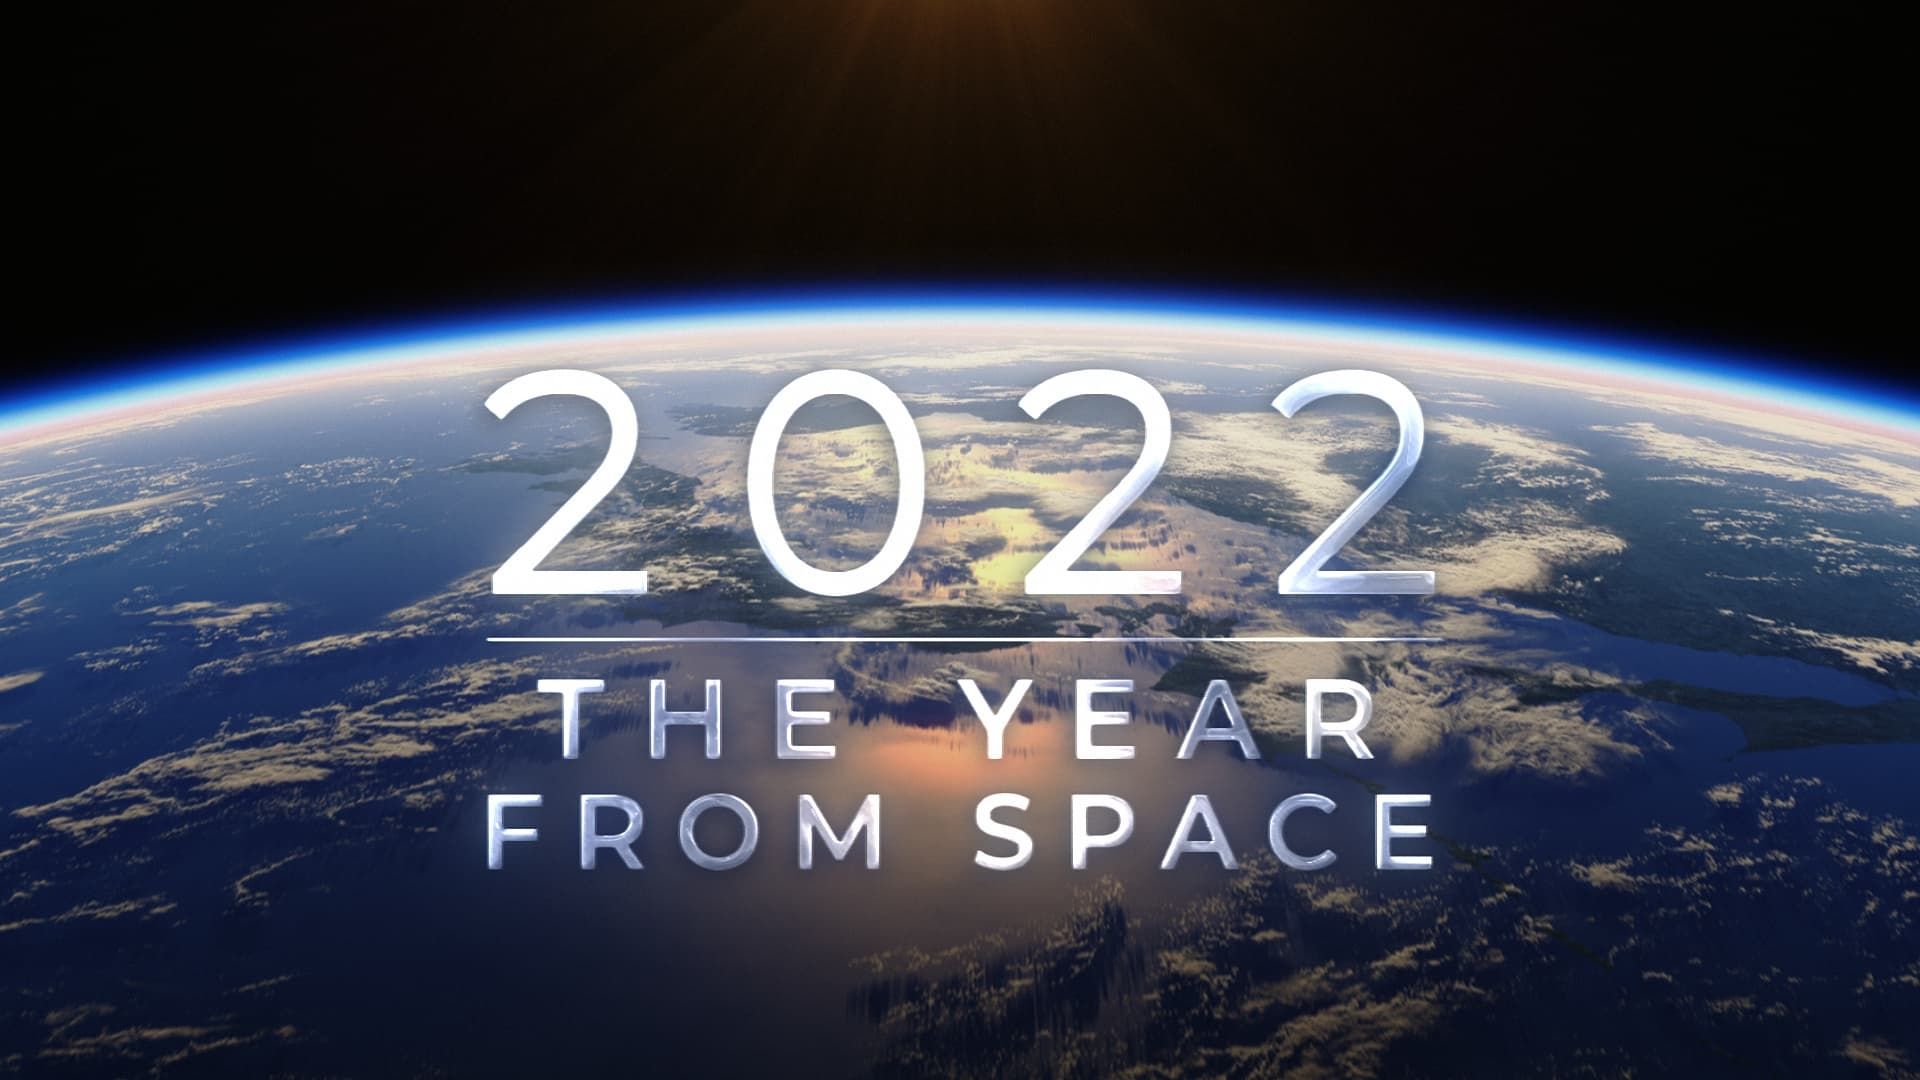 2022: The Year from Space background